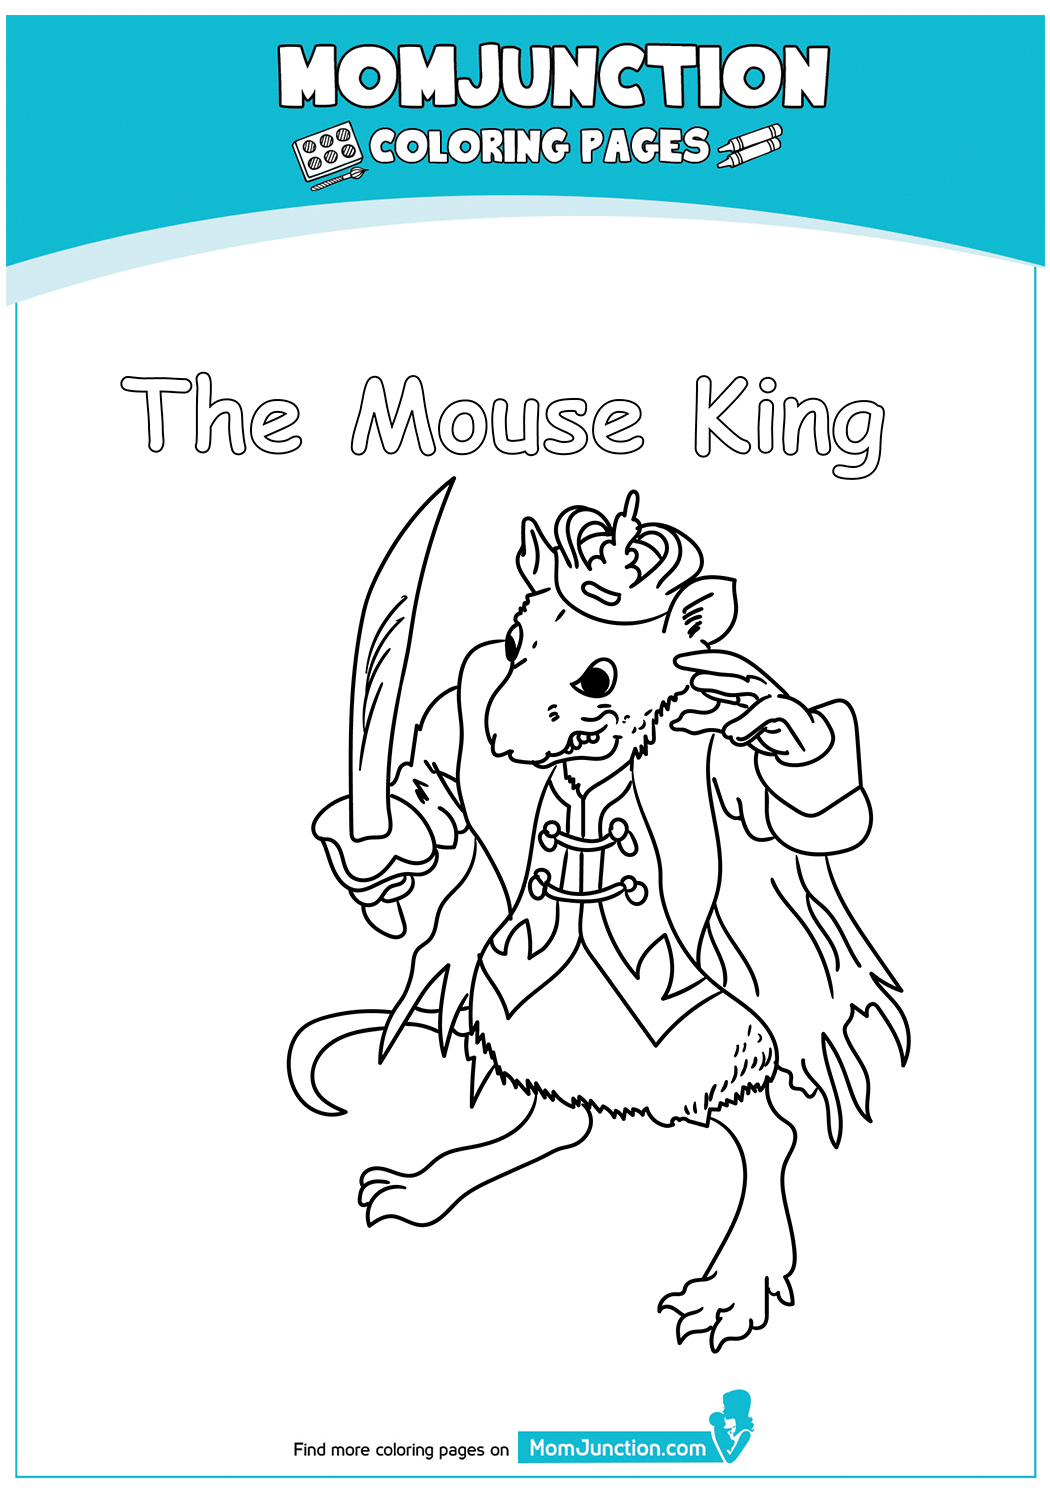 The-mouse-king-17